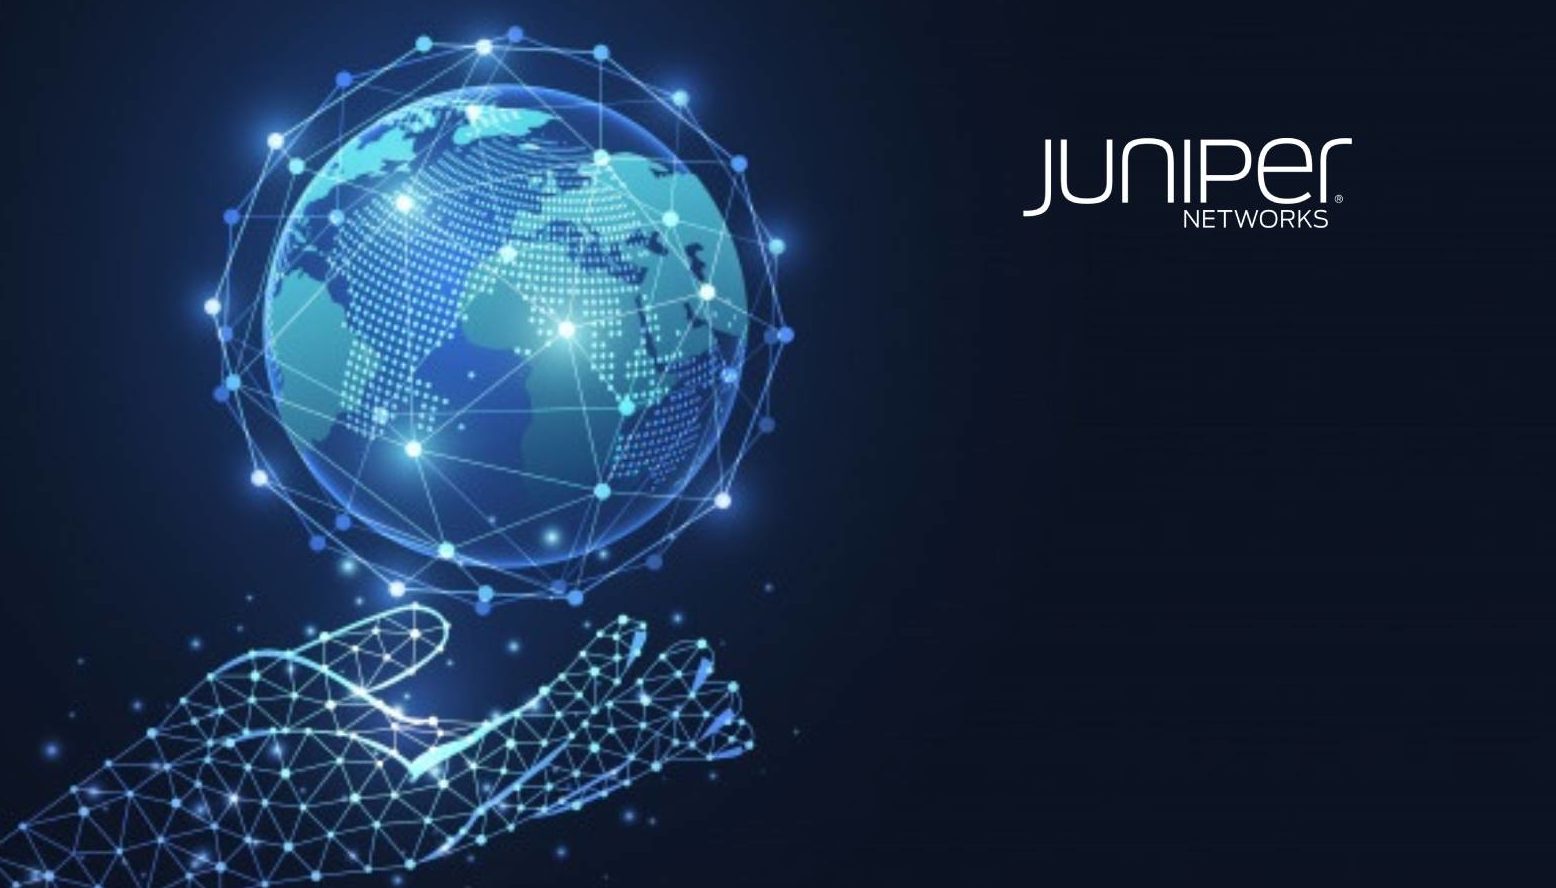 http://www.mdsiinc.com/wp-content/uploads/2022/08/Juniper-Networks-Updates-2020-Annual-Meeting-of-Stockholders-to-Virtual-Only-Format-Due-to-Global-Pandemic-Conditions-e1661482720447.jpg